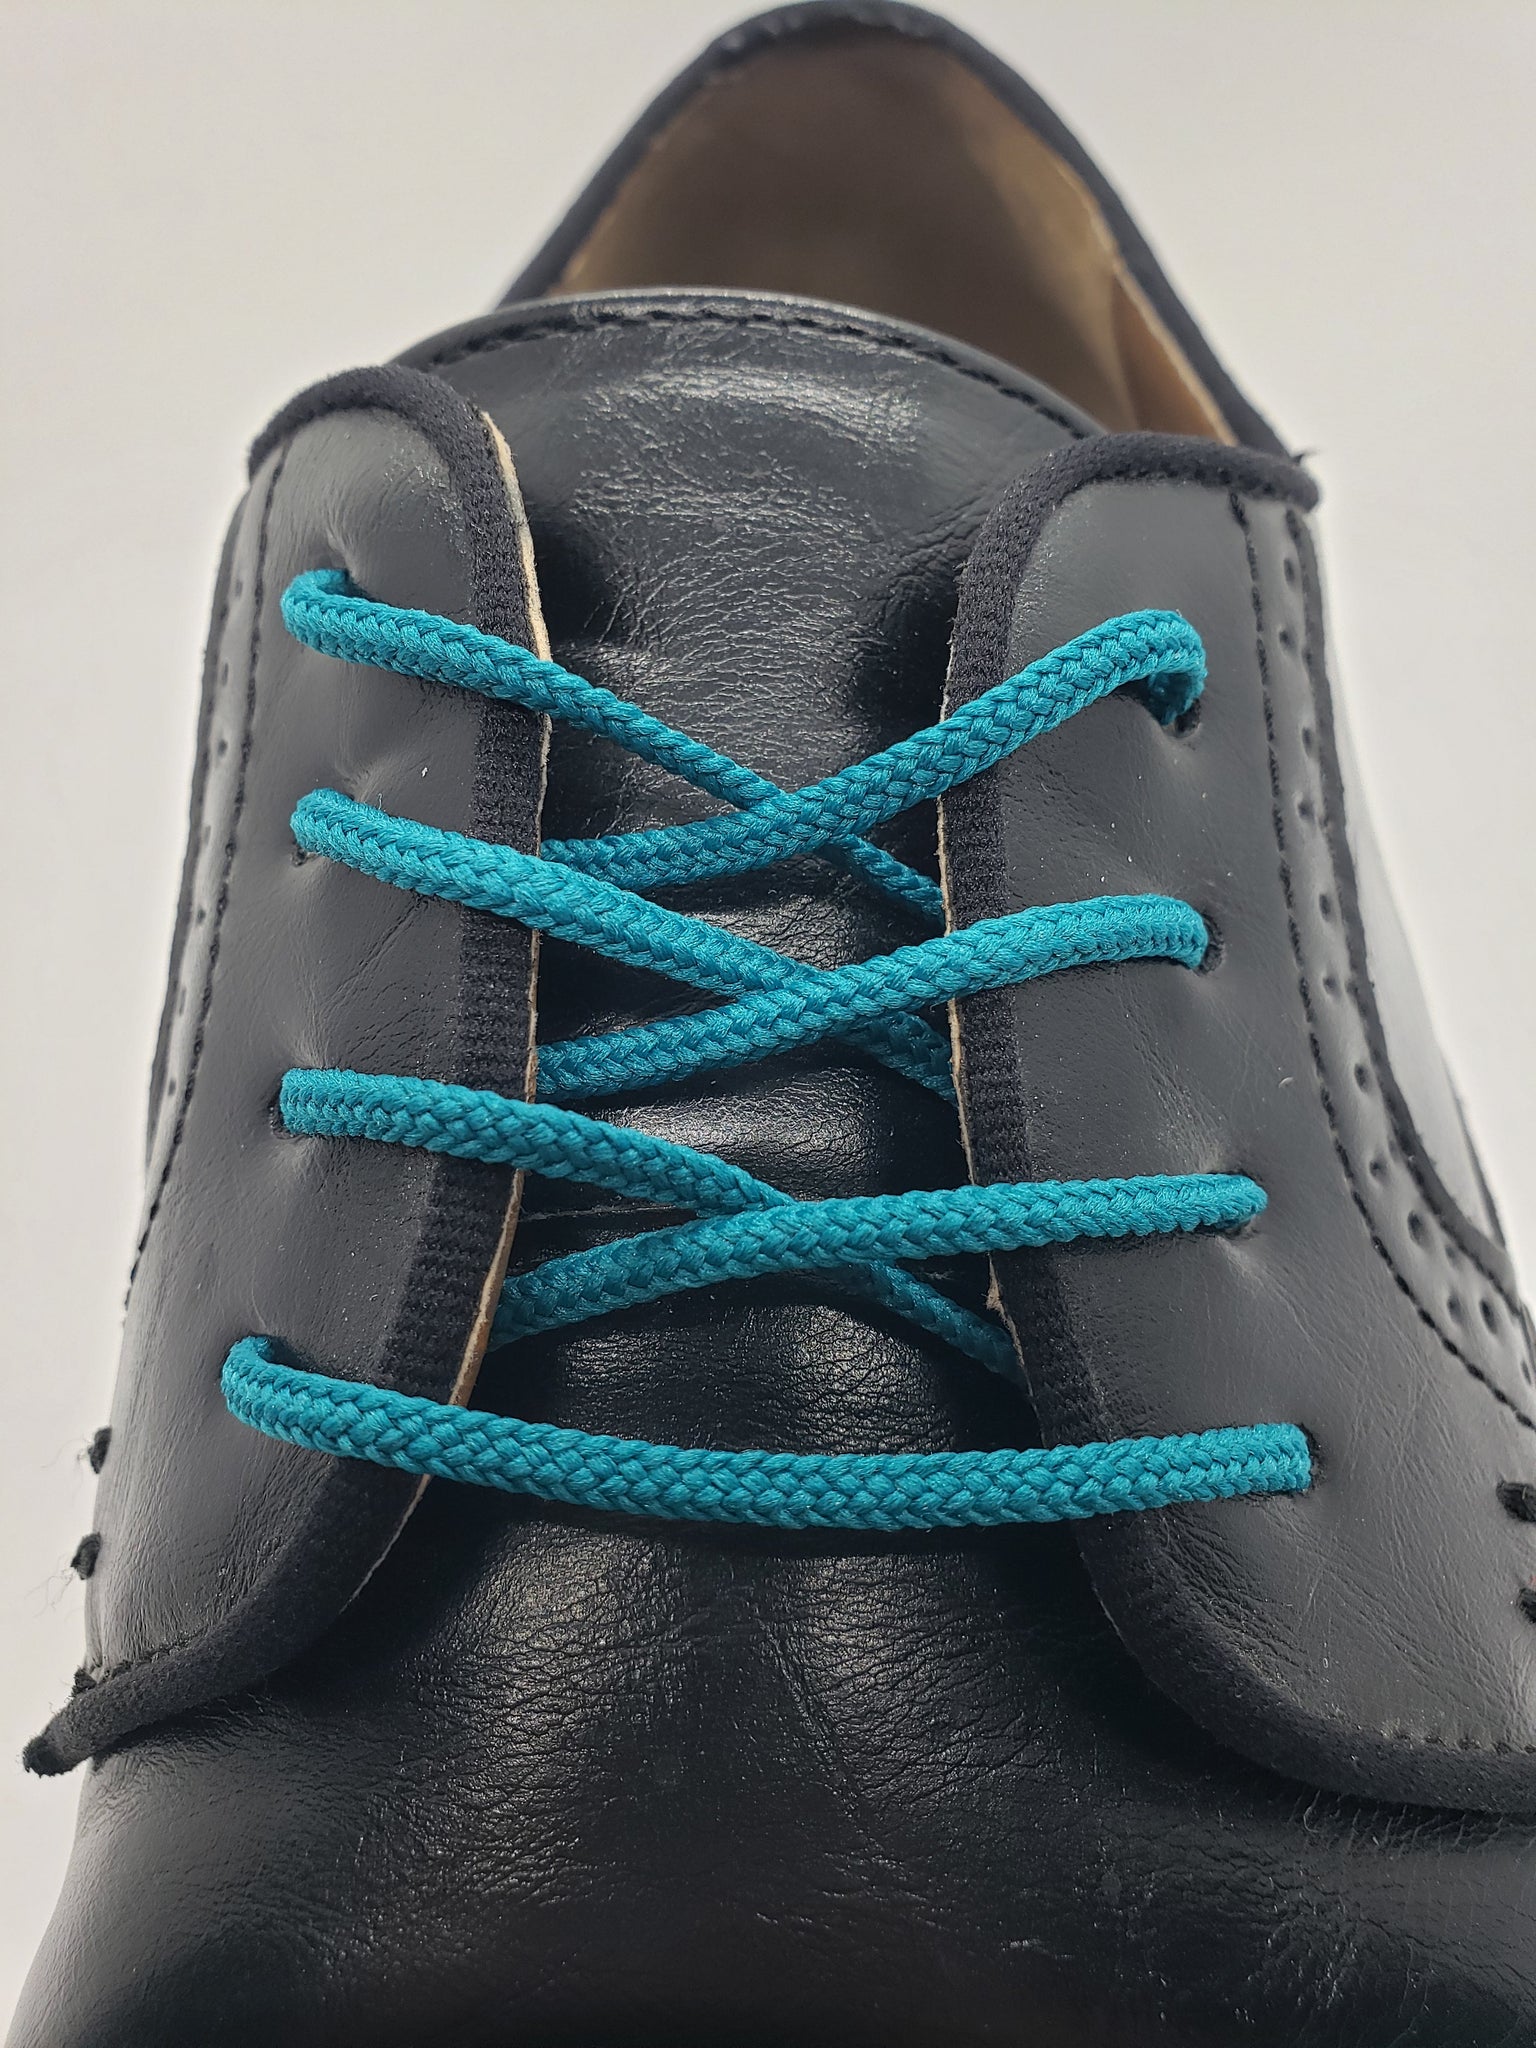 Round Dress Shoelaces - Teal